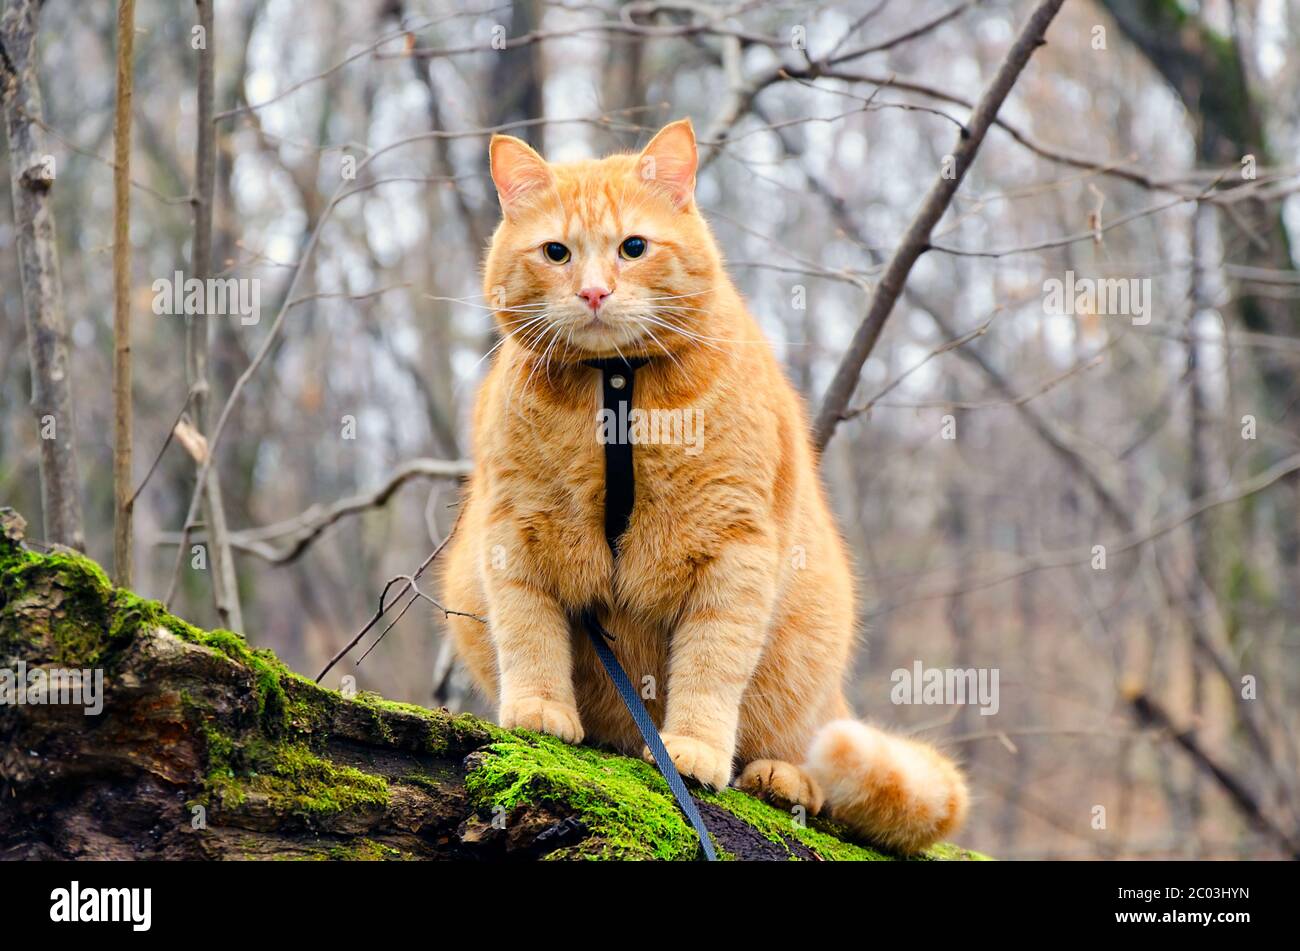 Red cat on a leash sitting on a felled tree in the Stock Photo